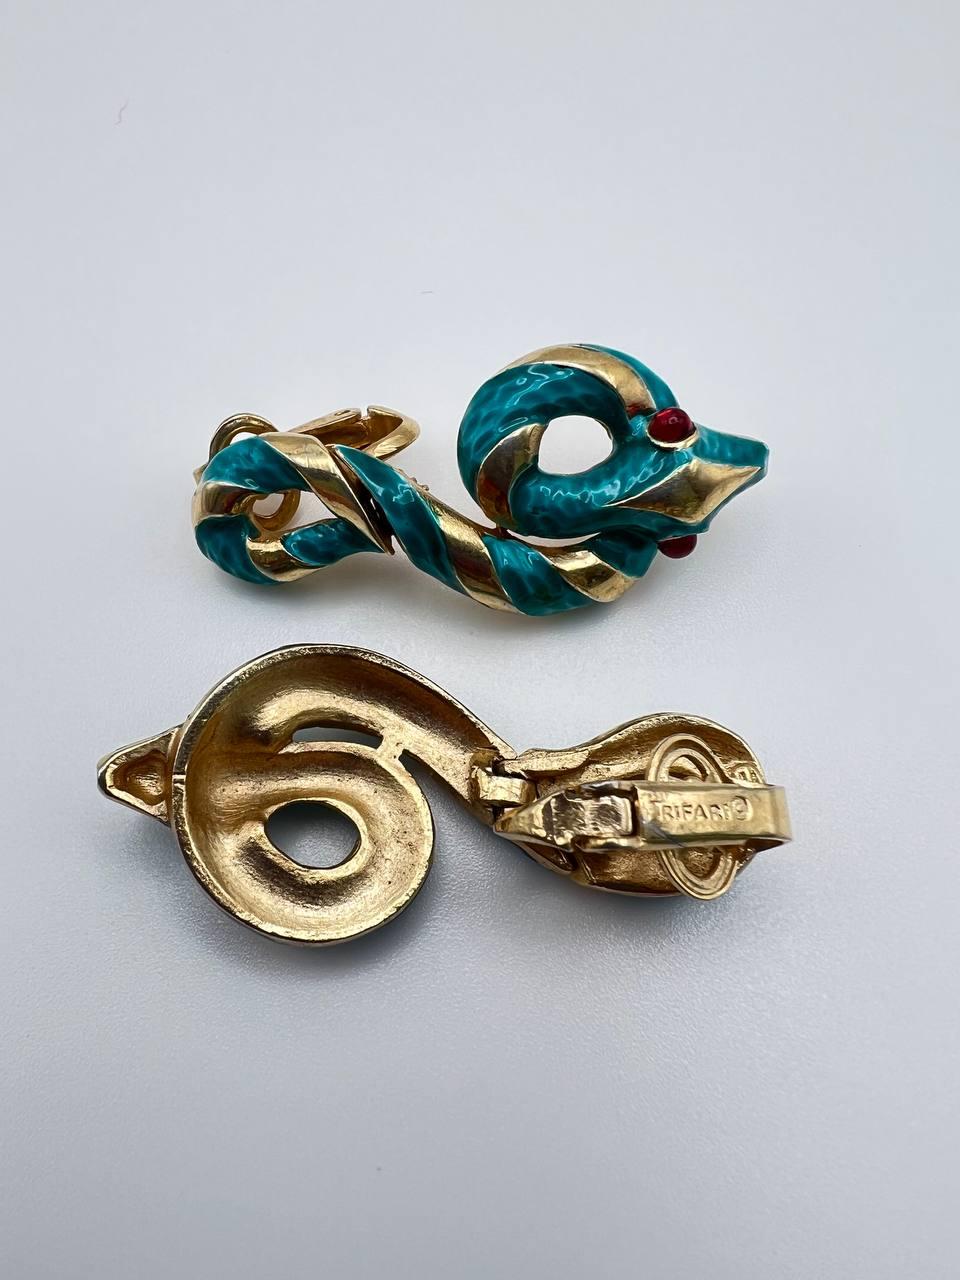 Vintage rare clip on earrings by Trifari featuring a snake in turquoise color with red rhinestone eyes.  In green and gold colors.
Period: 1960s, Garden of Eden collection by Alfred Philippe. 
Condition: very good
........Additional information